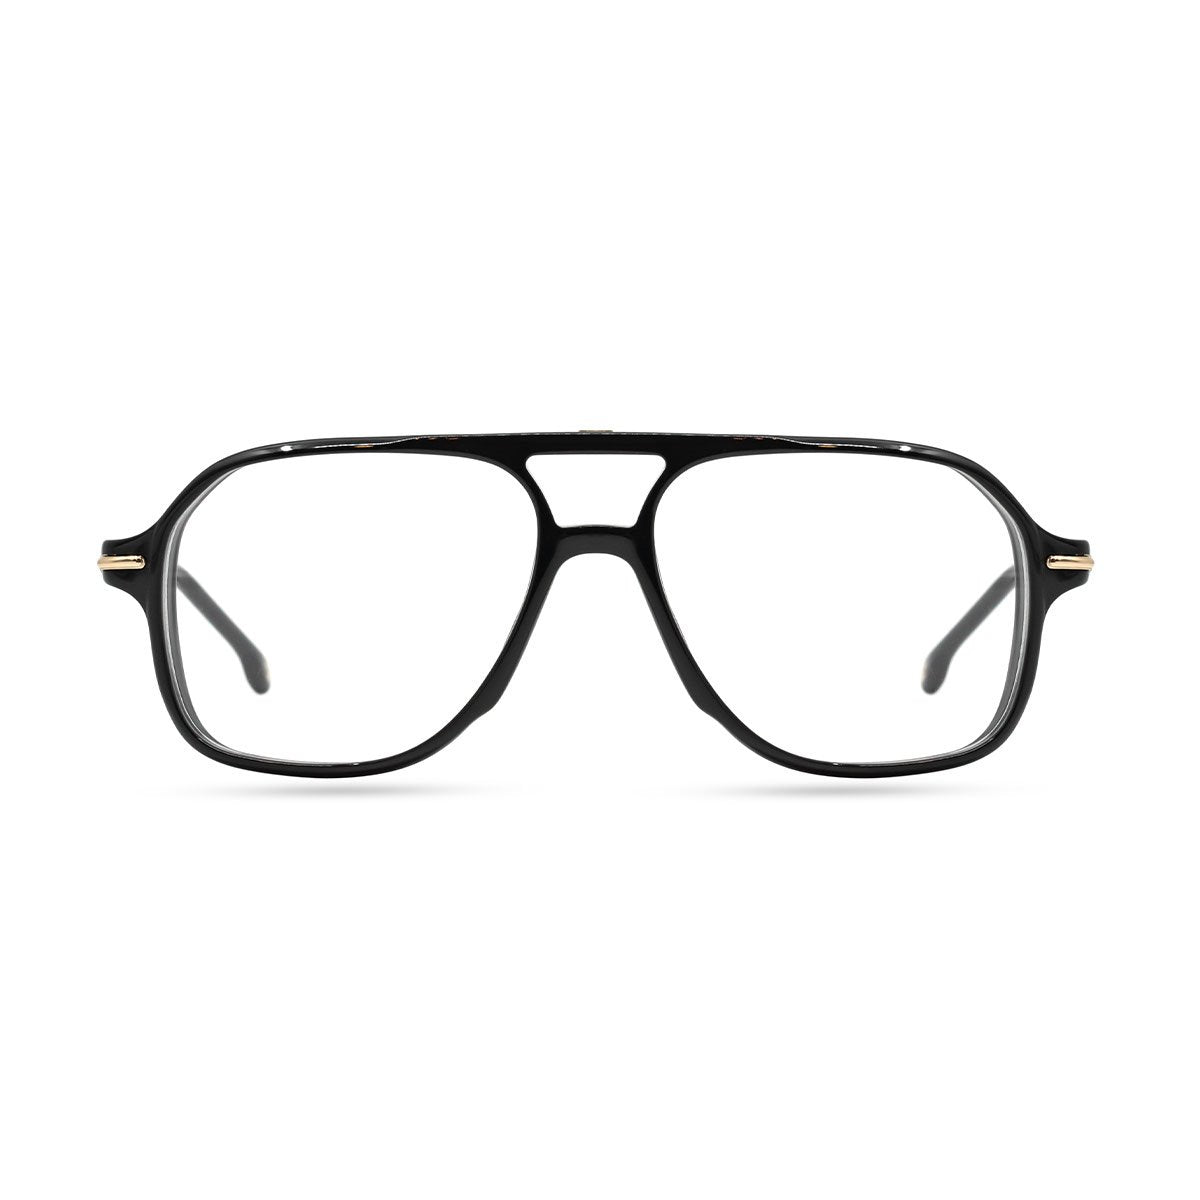 CARRERA 239 807 spectacle-frame